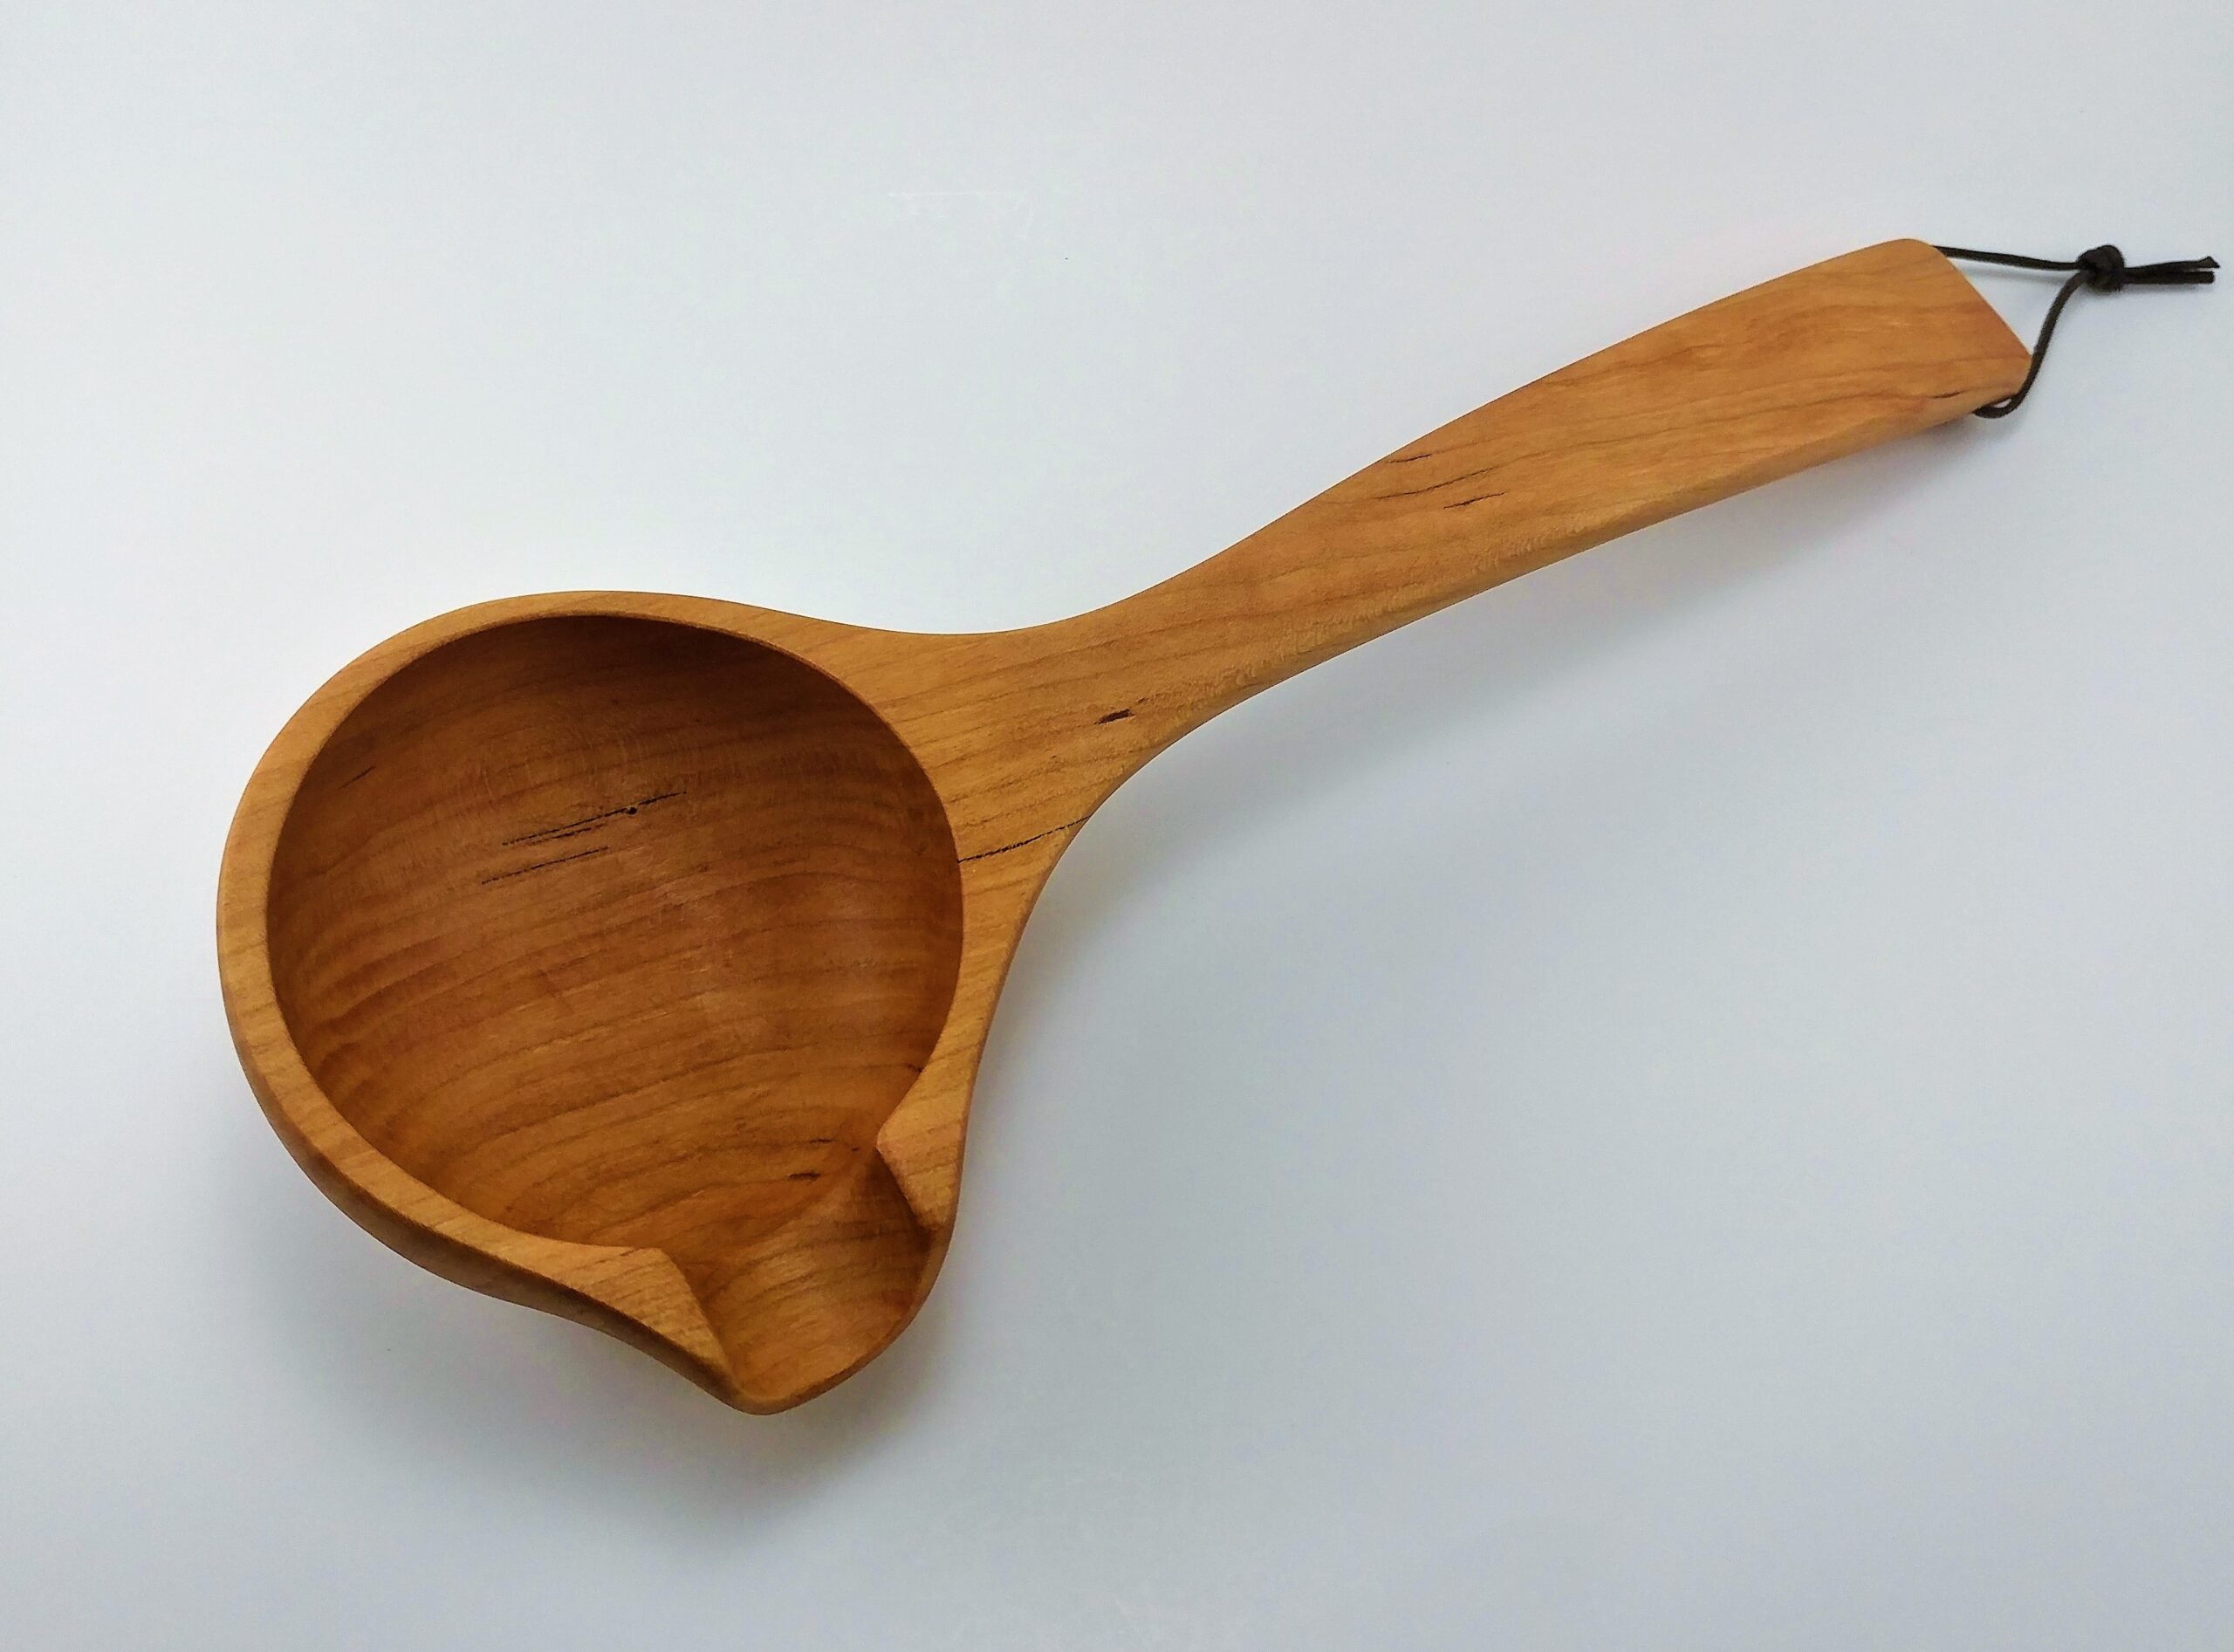 https://alleghenytreenware.com/wp-content/uploads/12-Spouted-Serving-Spoon-scaled.jpg